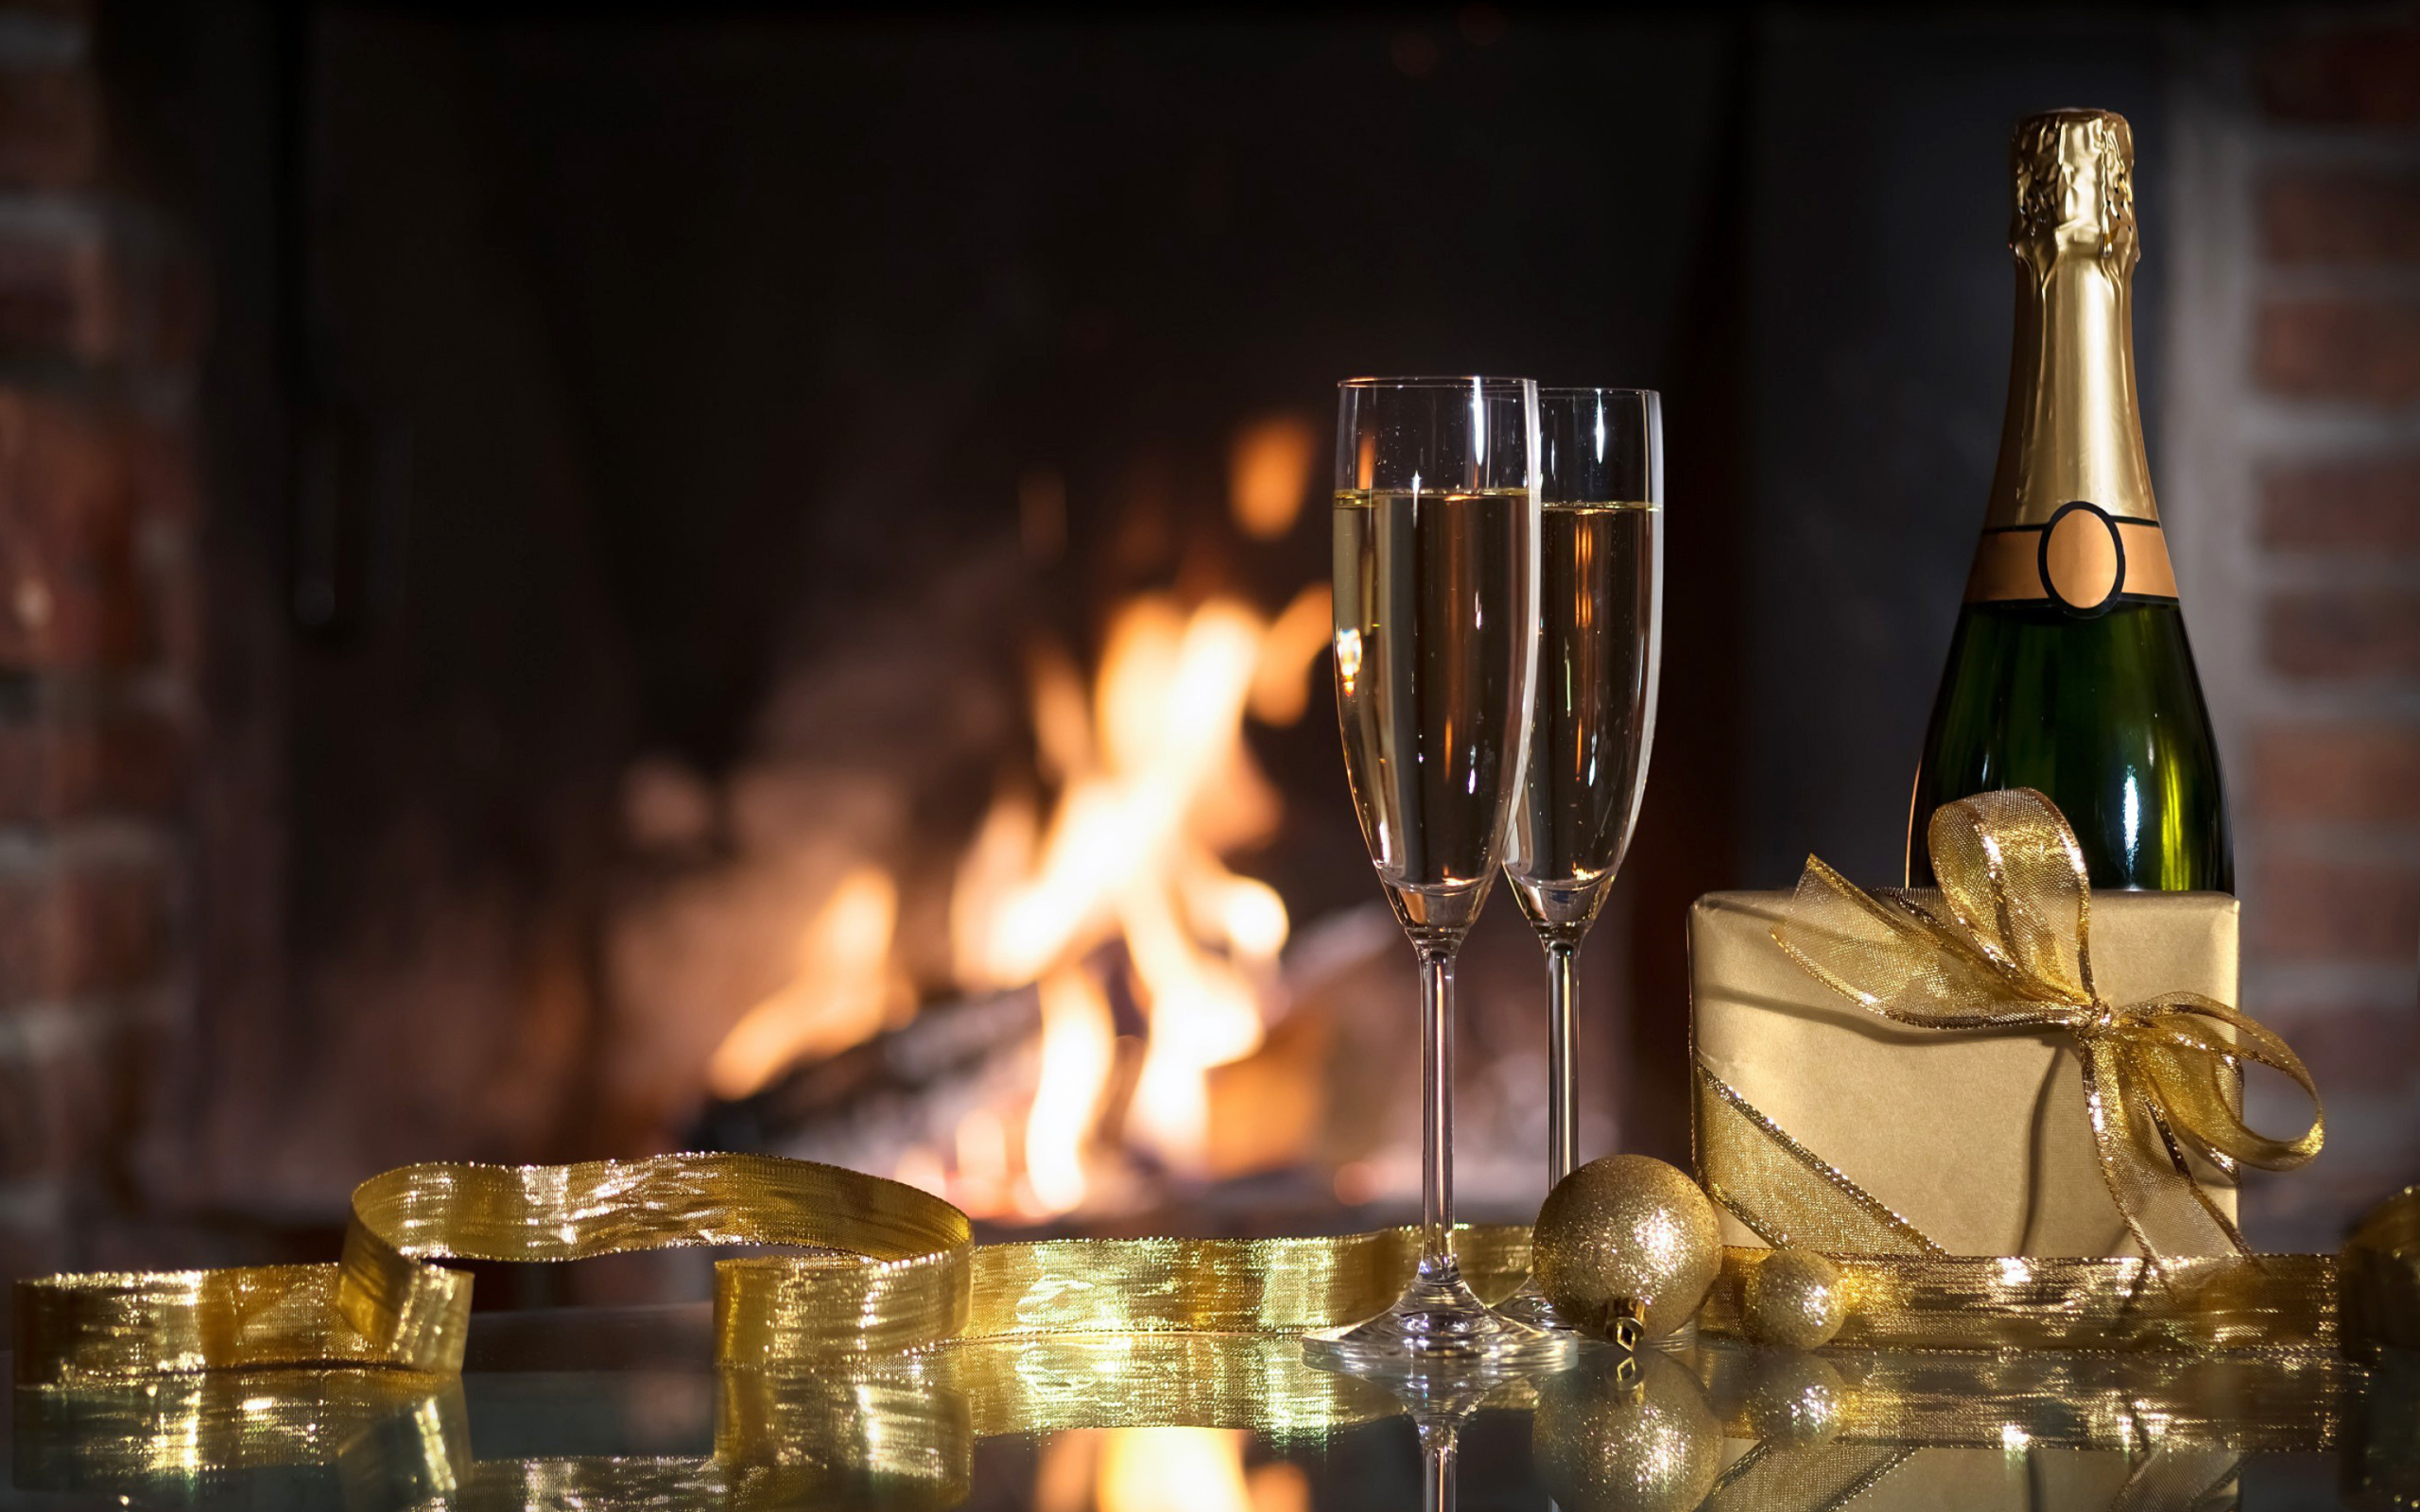 Champagne and Fireplace wallpaper 2560x1600